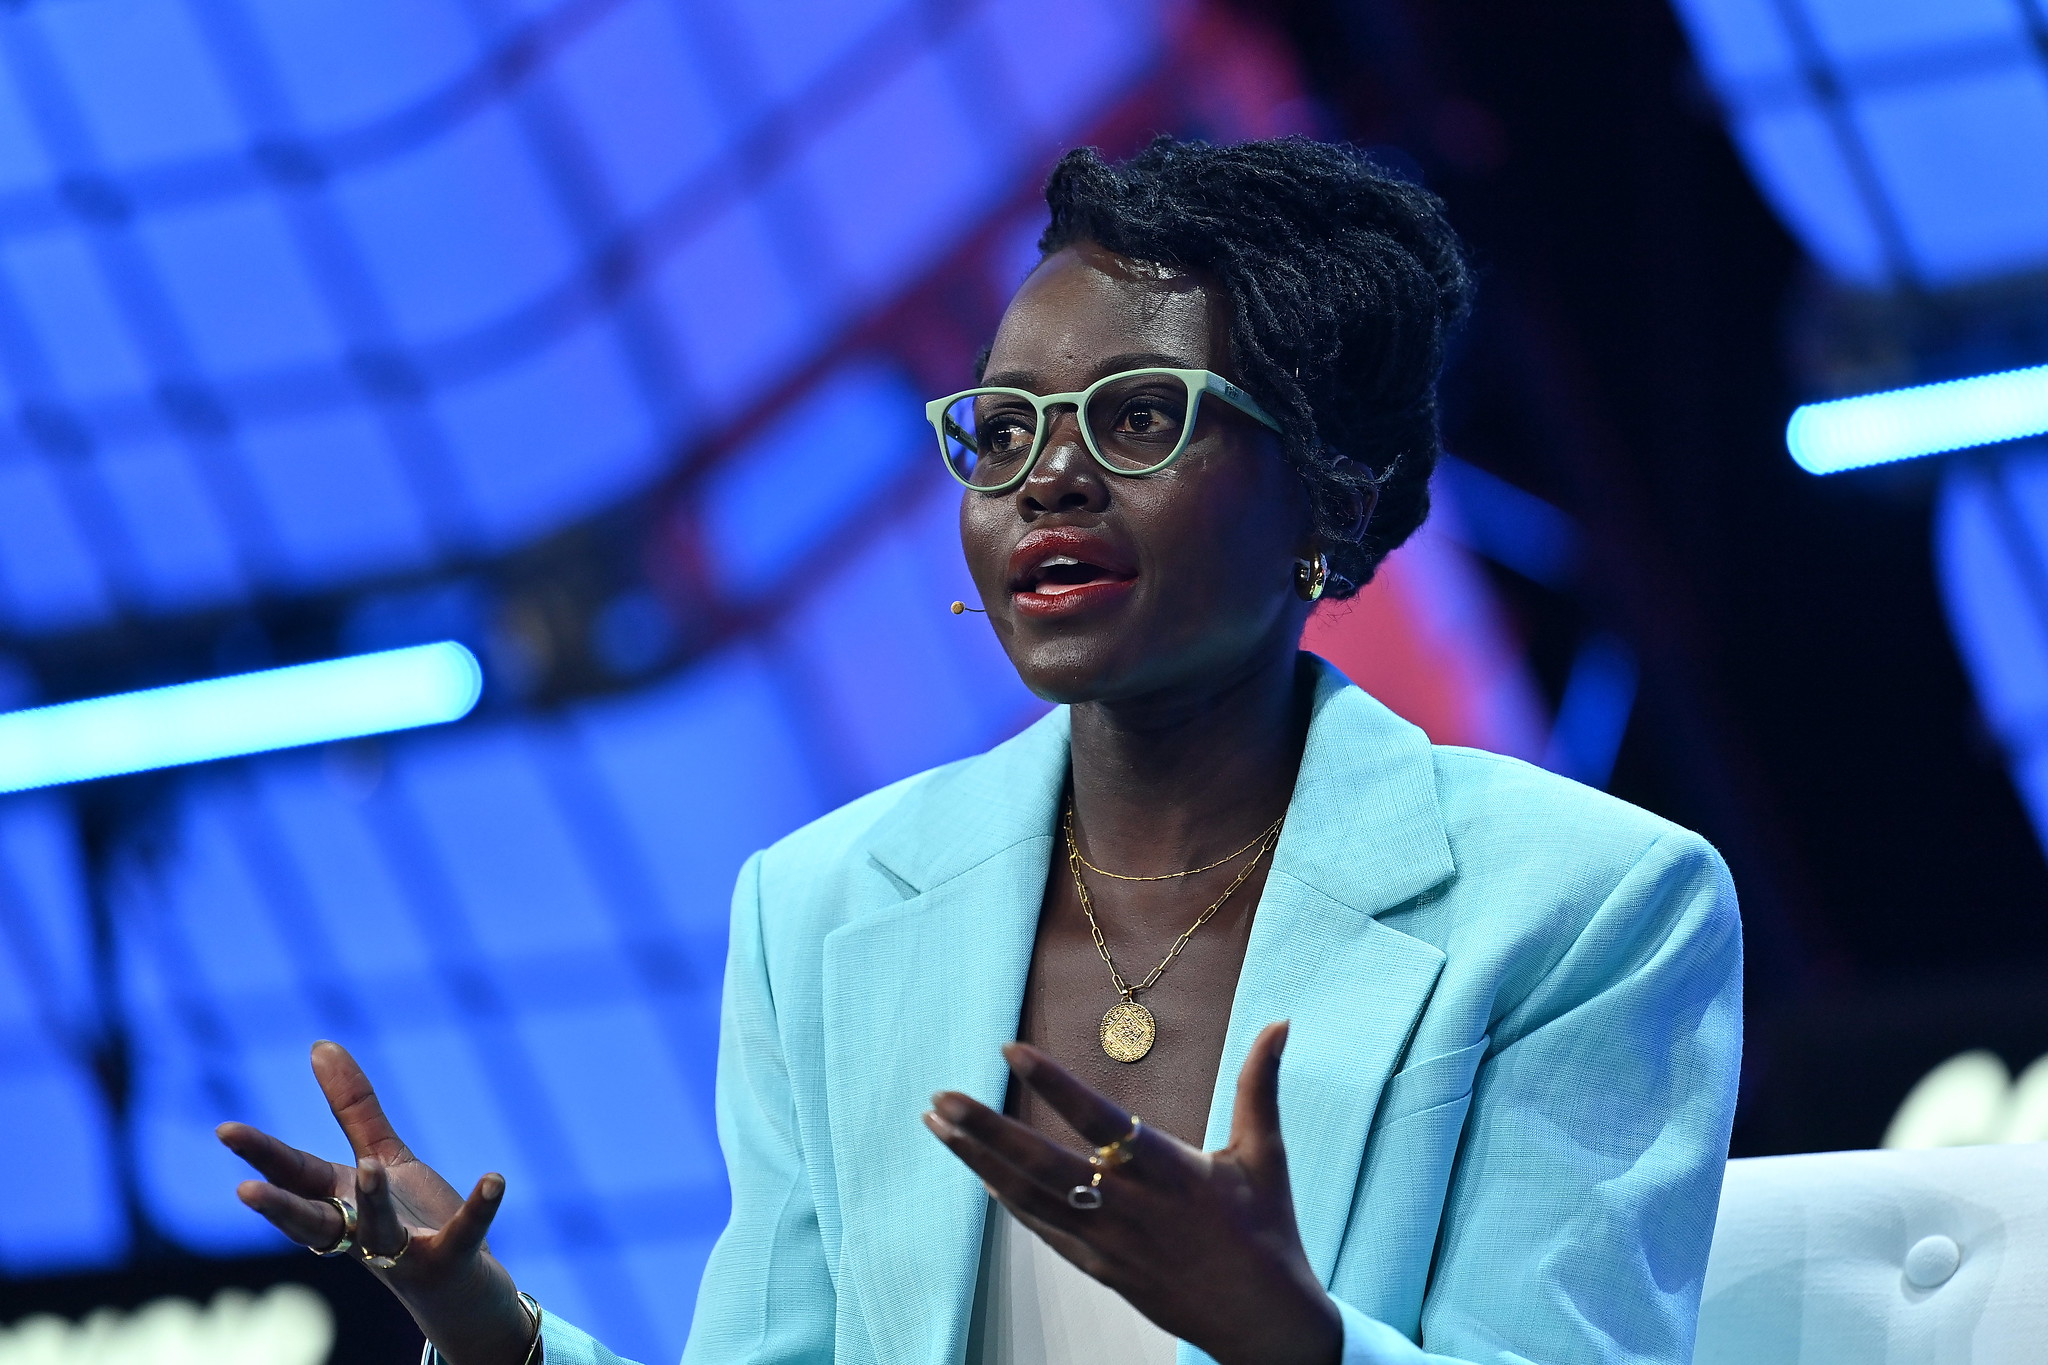 Photograph of a person (Actor Lupita Nyong‘o) speaking on stage at Web Summit. The person is gesturing with their hands.